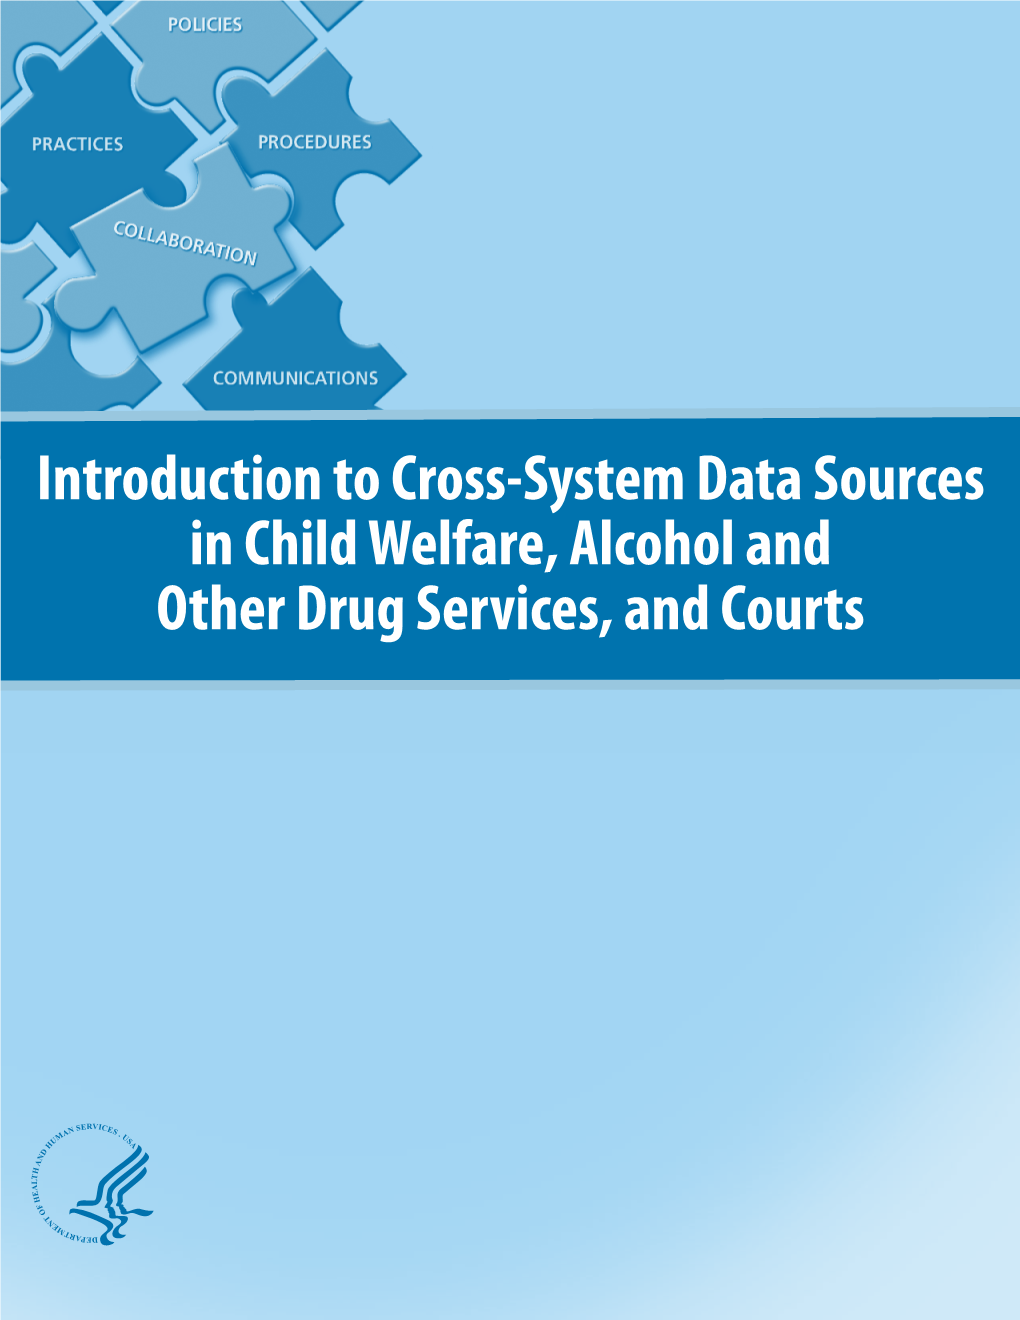 Introduction to Cross-System Data Sources in Child Welfare, Alcohol and Other Drug Services, and Courts